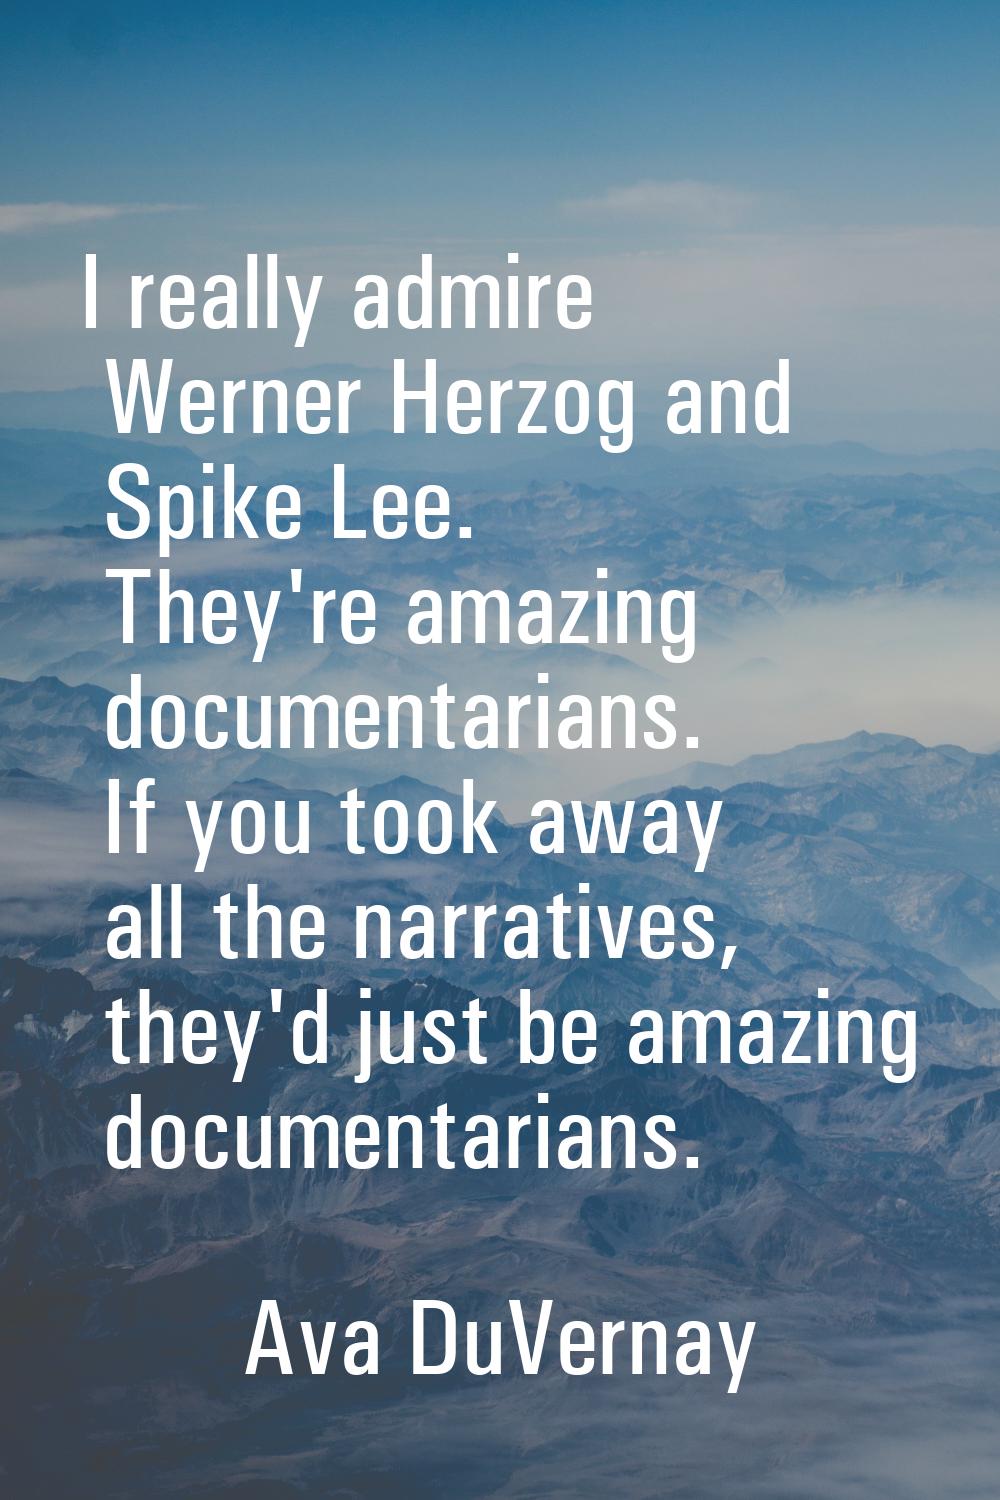 I really admire Werner Herzog and Spike Lee. They're amazing documentarians. If you took away all t